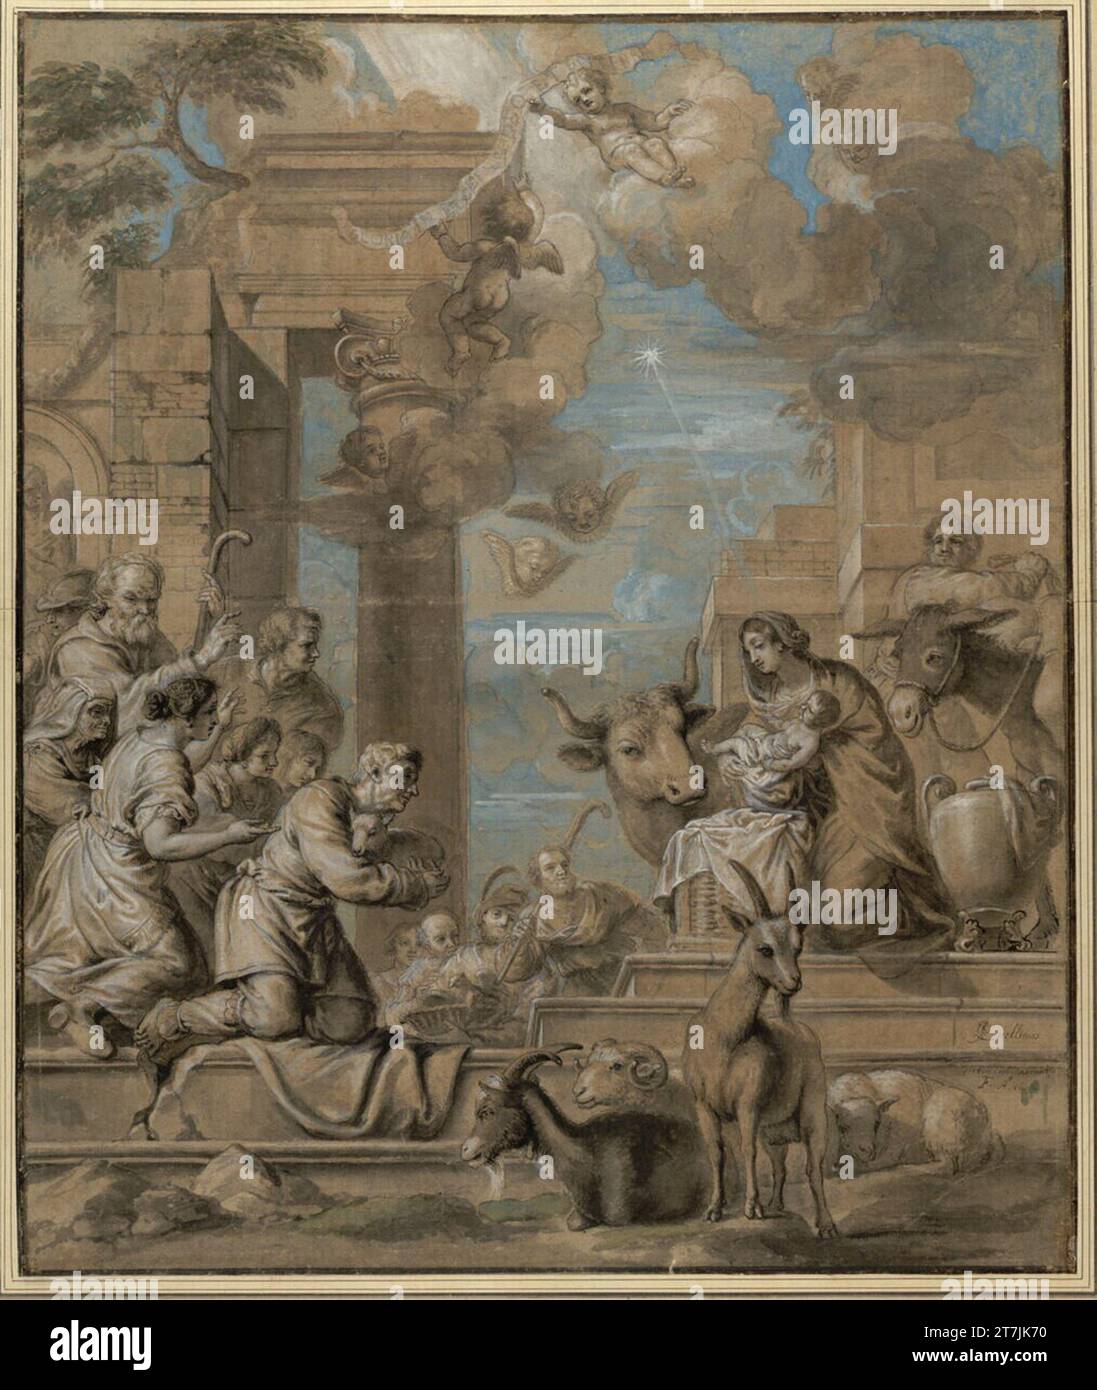 Jan Erasmus Quellinus The adoration of the shepherds. Brush in gray, blue (with deck white) and green laved, heighted with deck white, over black chalk, on light brown paper; Disrupts and slight damage to the edges. 1690 , 1690 Stock Photo